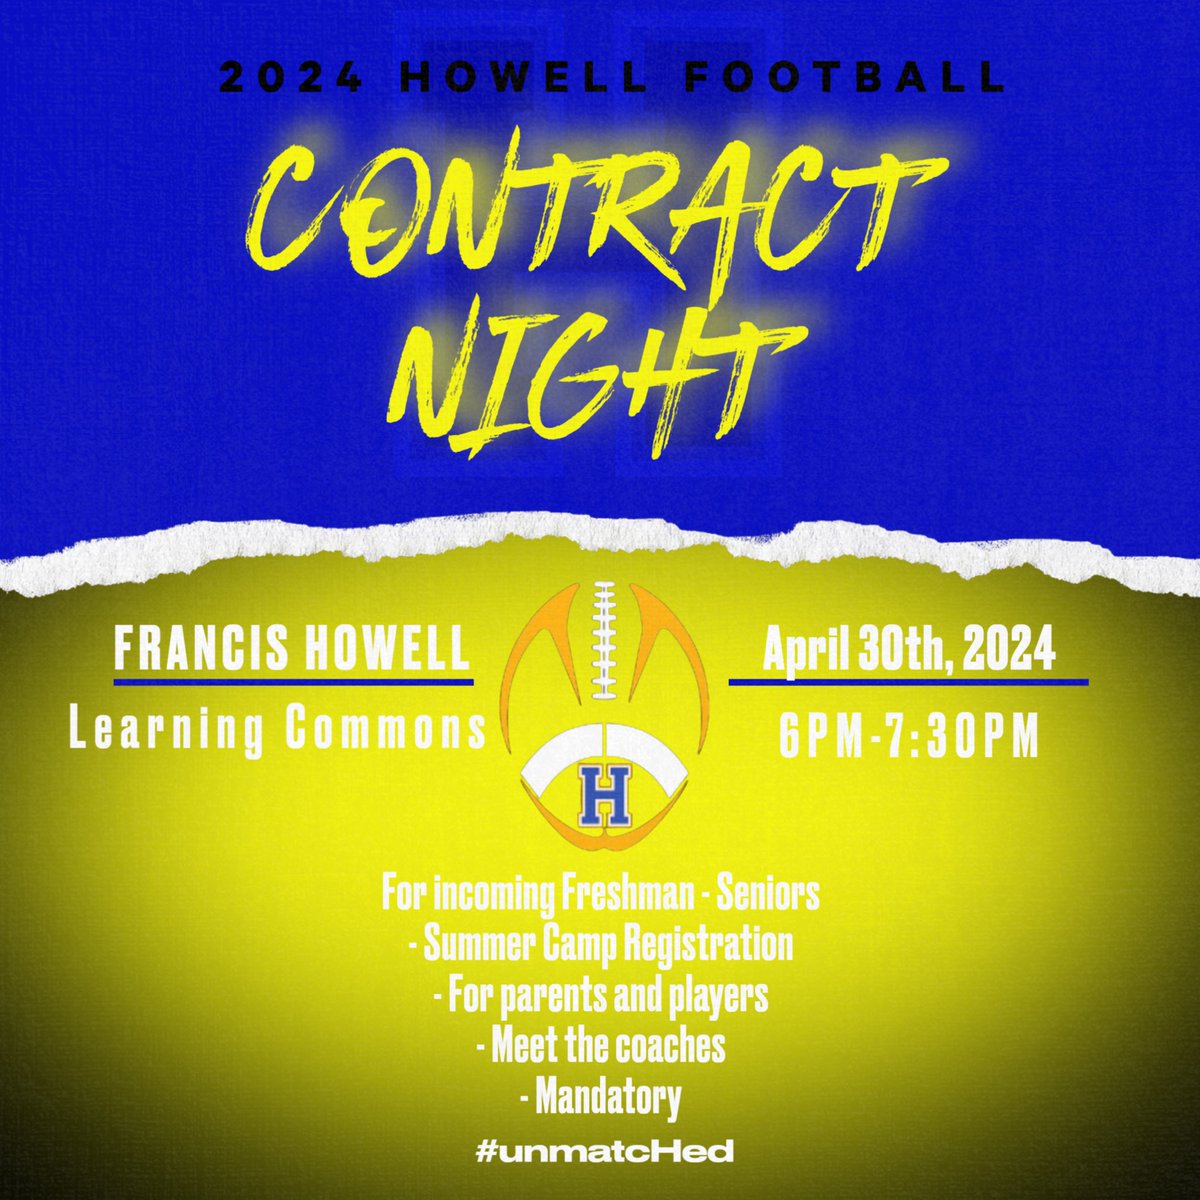 Mark your calendars for our 2024 Contract Night. This is a mandatory for all players and parents who plan on playing football in 2024.